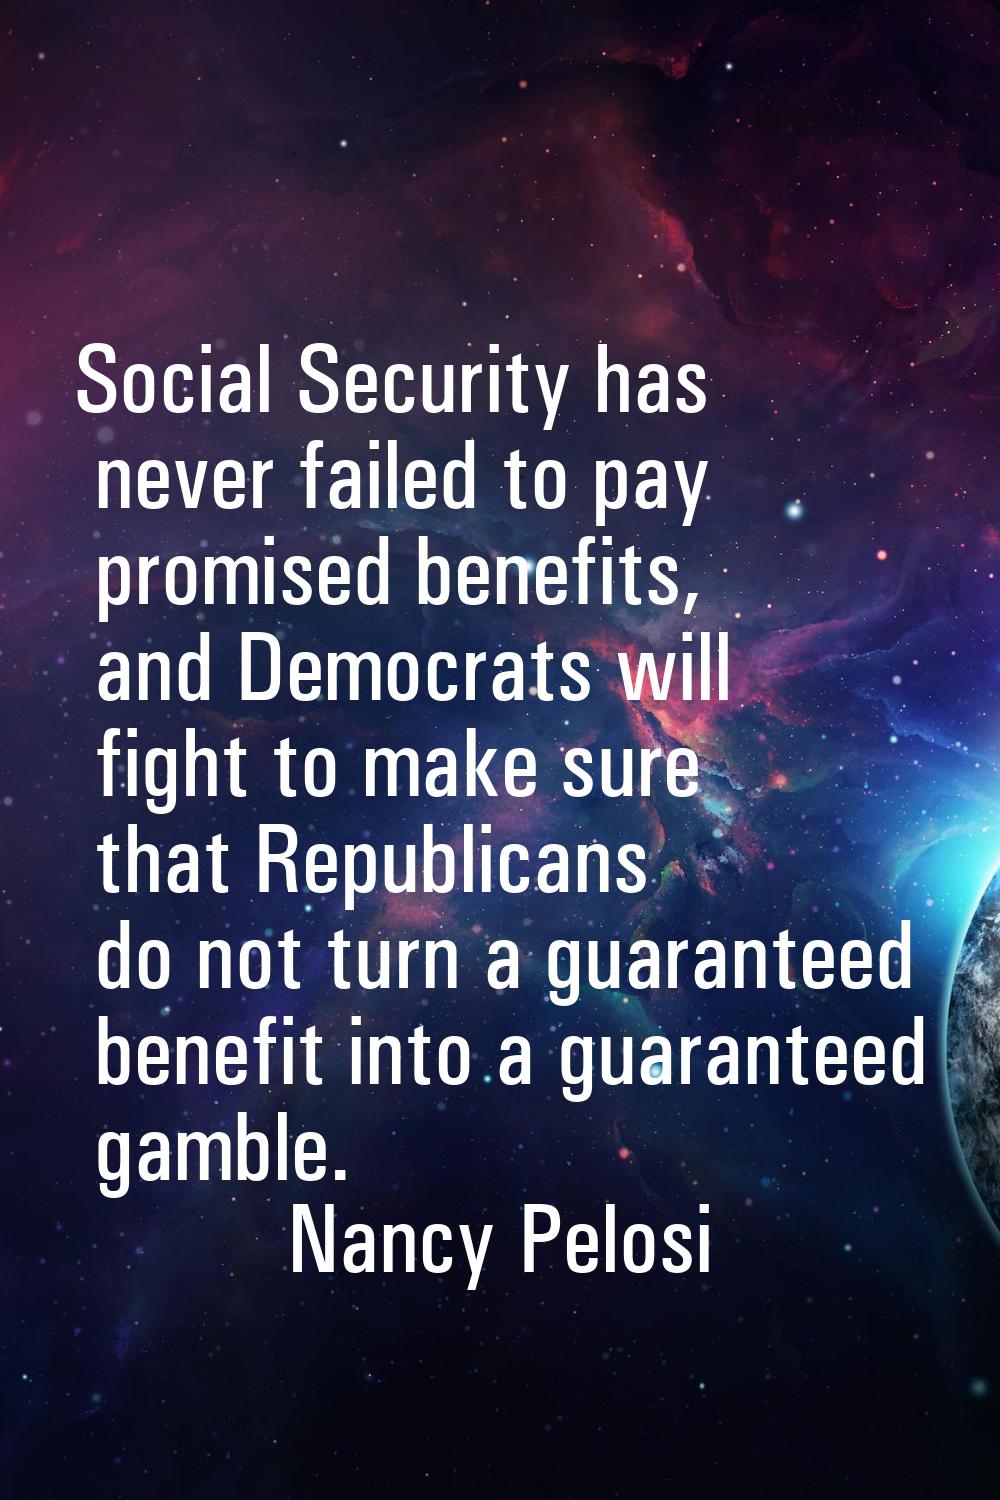 Social Security has never failed to pay promised benefits, and Democrats will fight to make sure th